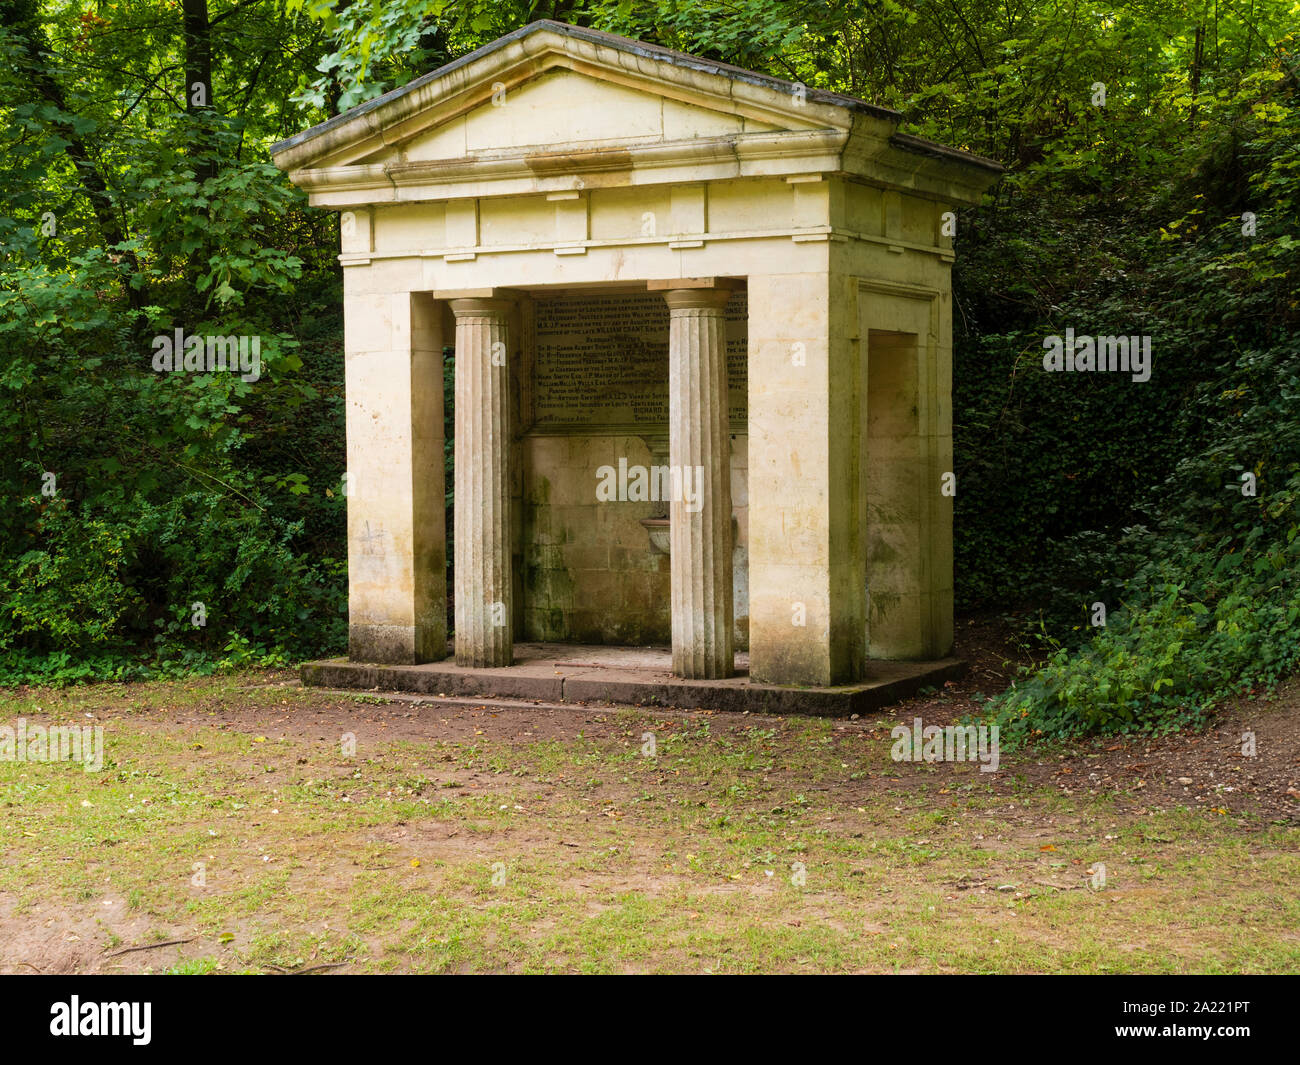 The Pahud memorial drinking fountain in Hubbard's Hills, an area of natural beauty in Louth, Lincolnshire Stock Photo